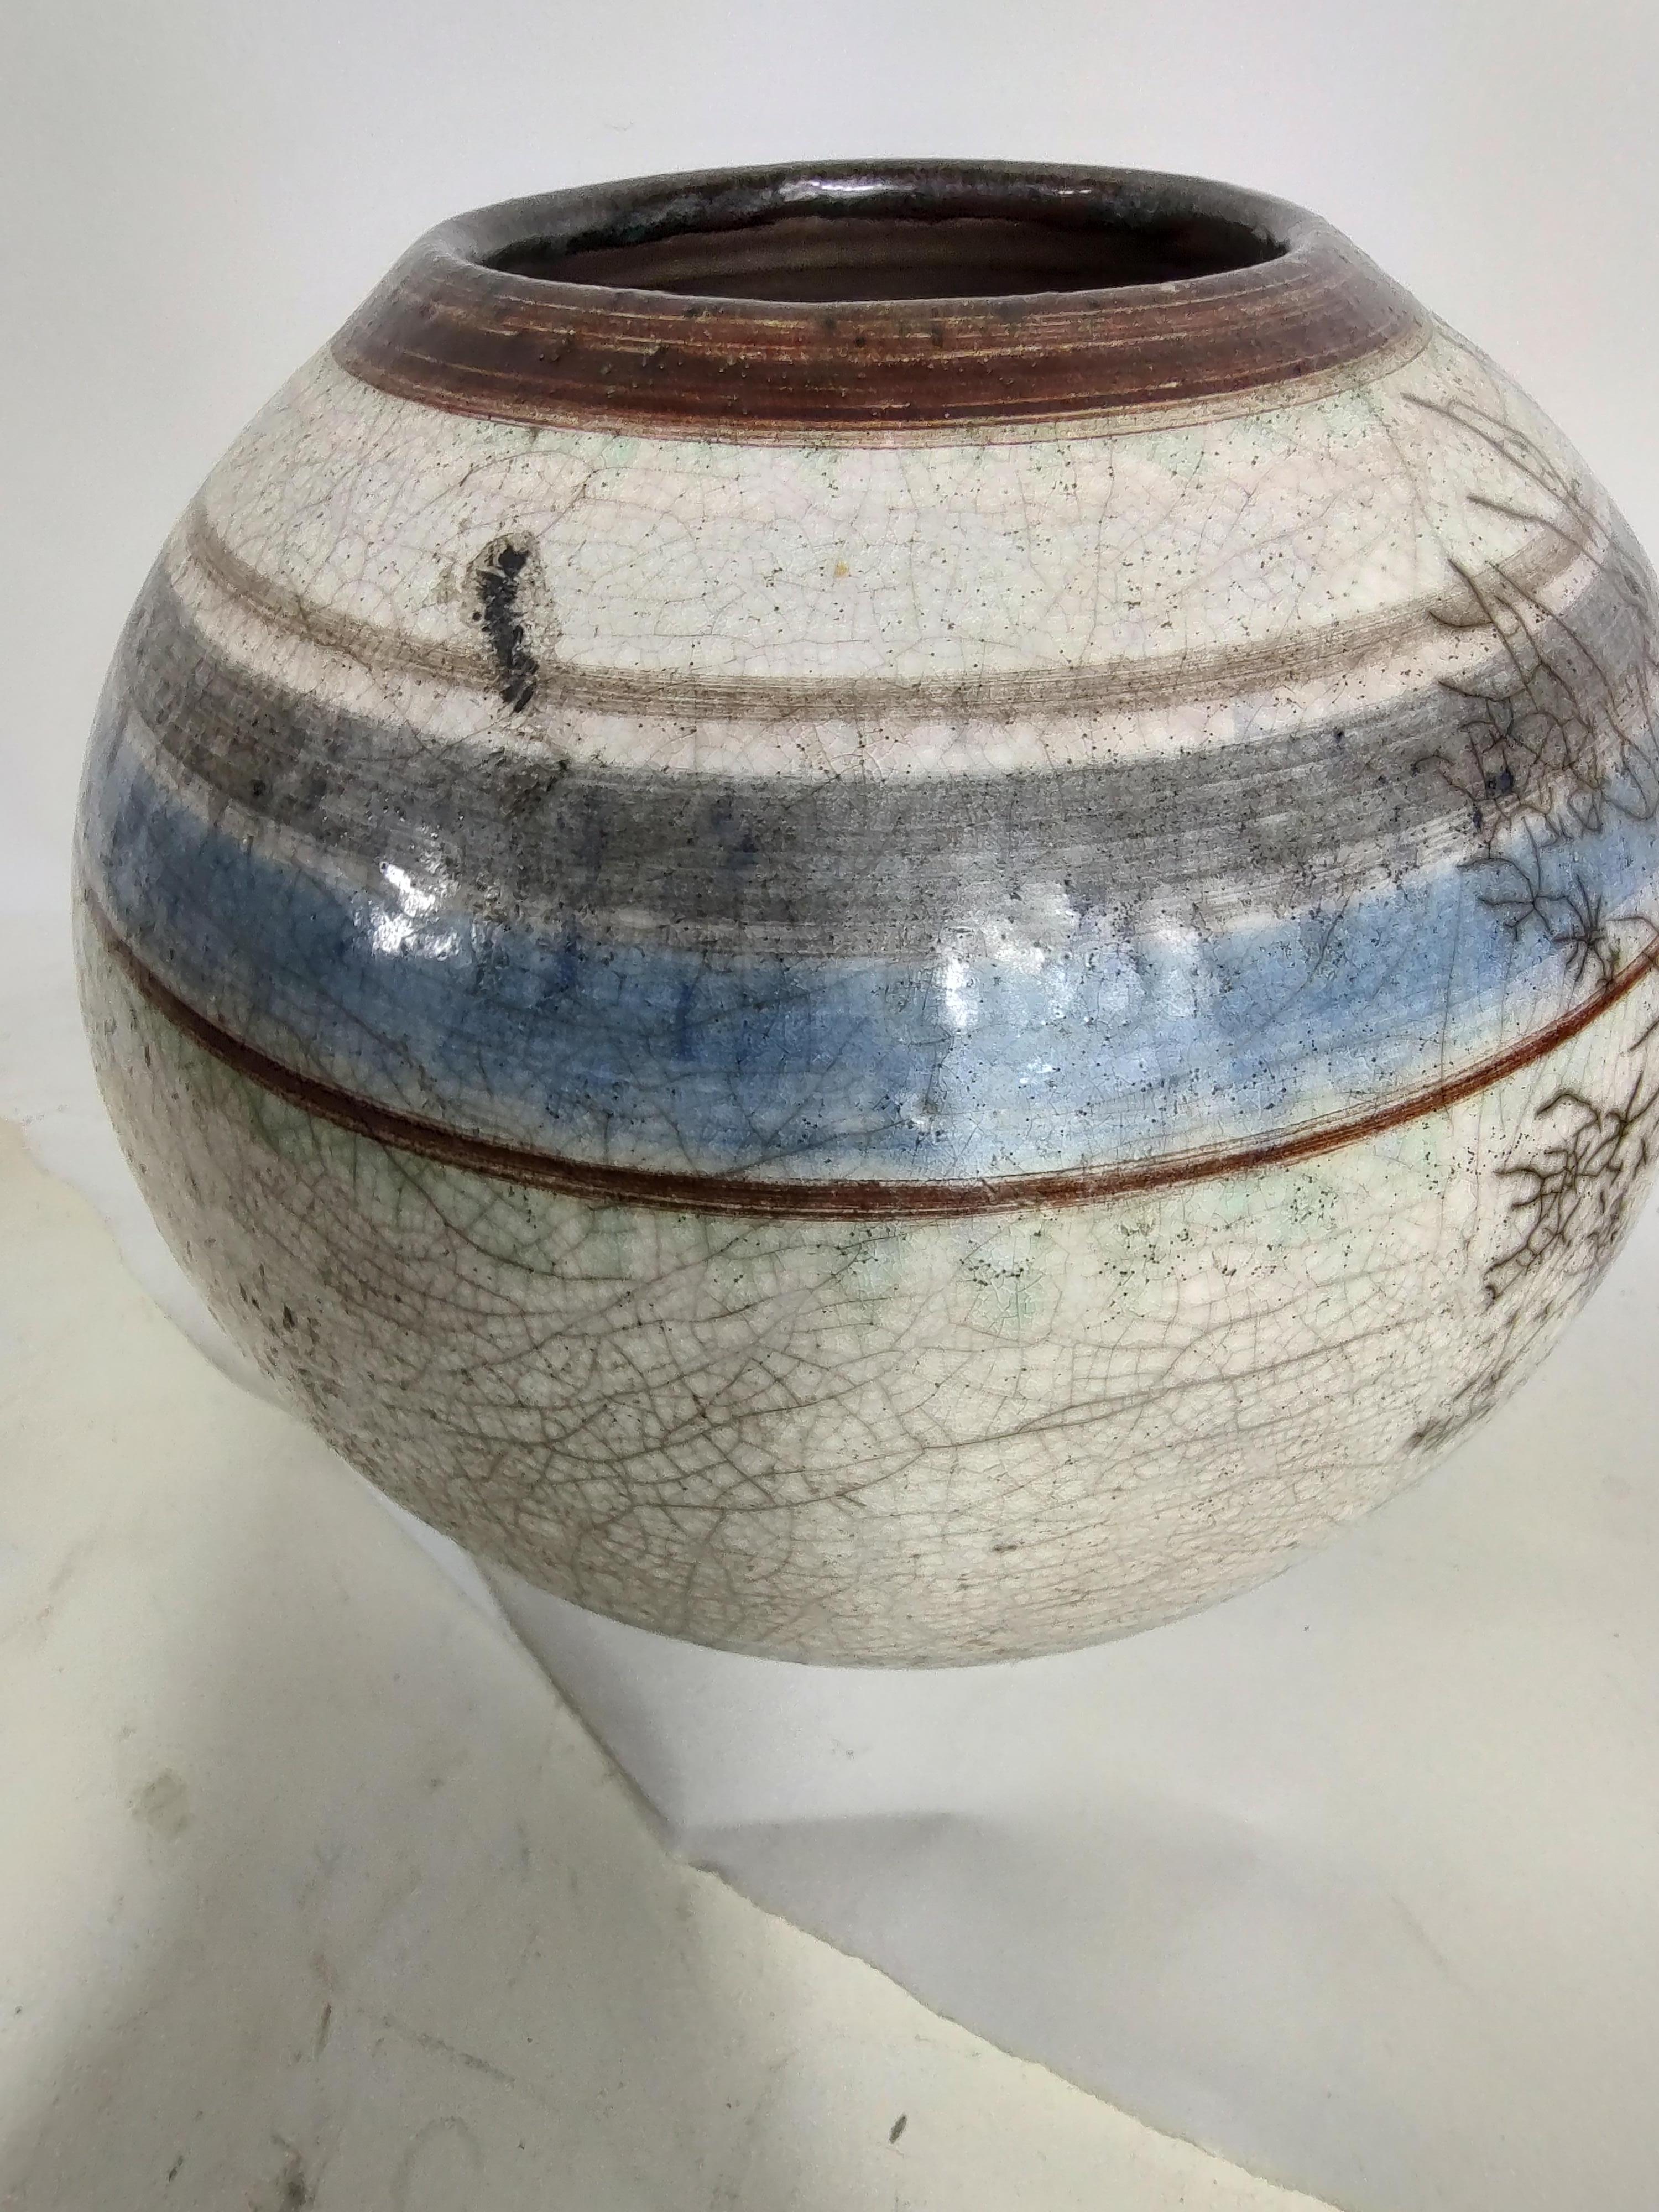 Fabulous hand thrown vase in the Mid-Century Modern arts & crafts style with crazed glaze. Intentionally glazed to look like fissures this vase is a true work of art. In excellent vintage condition with minimal wear.